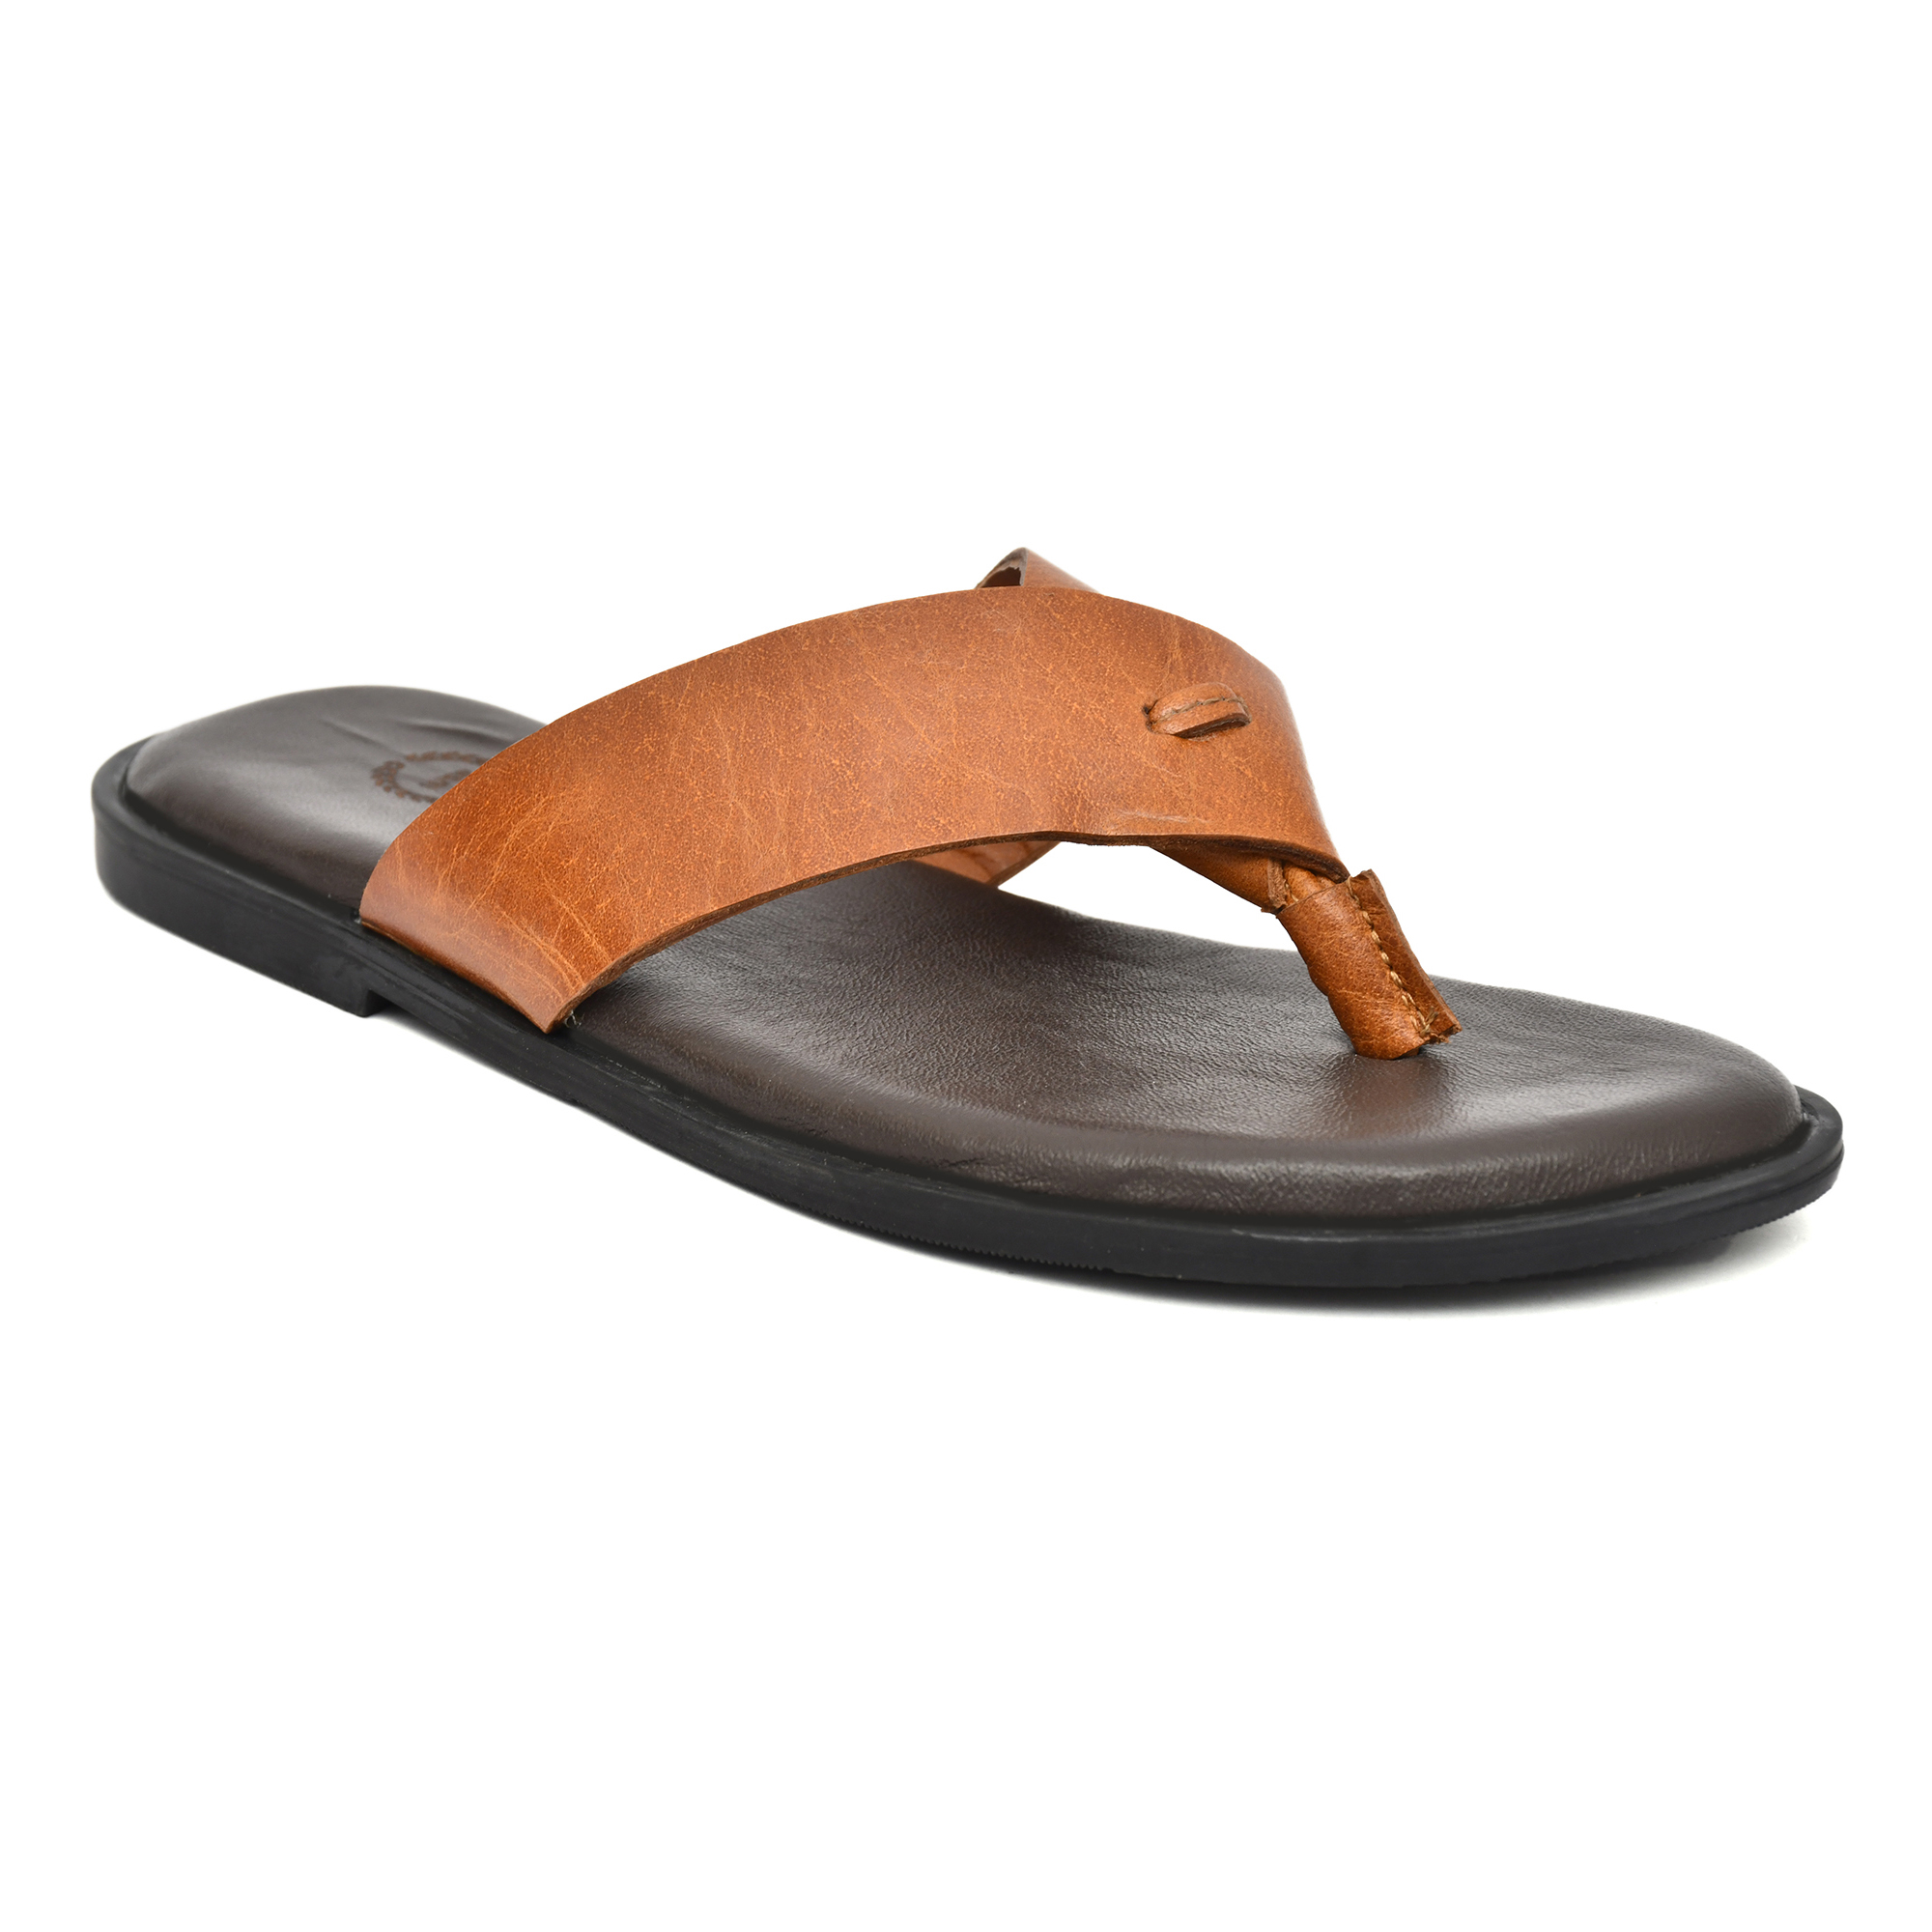 Tan Leather Slippers for Men with Memory foam footpad by asm.